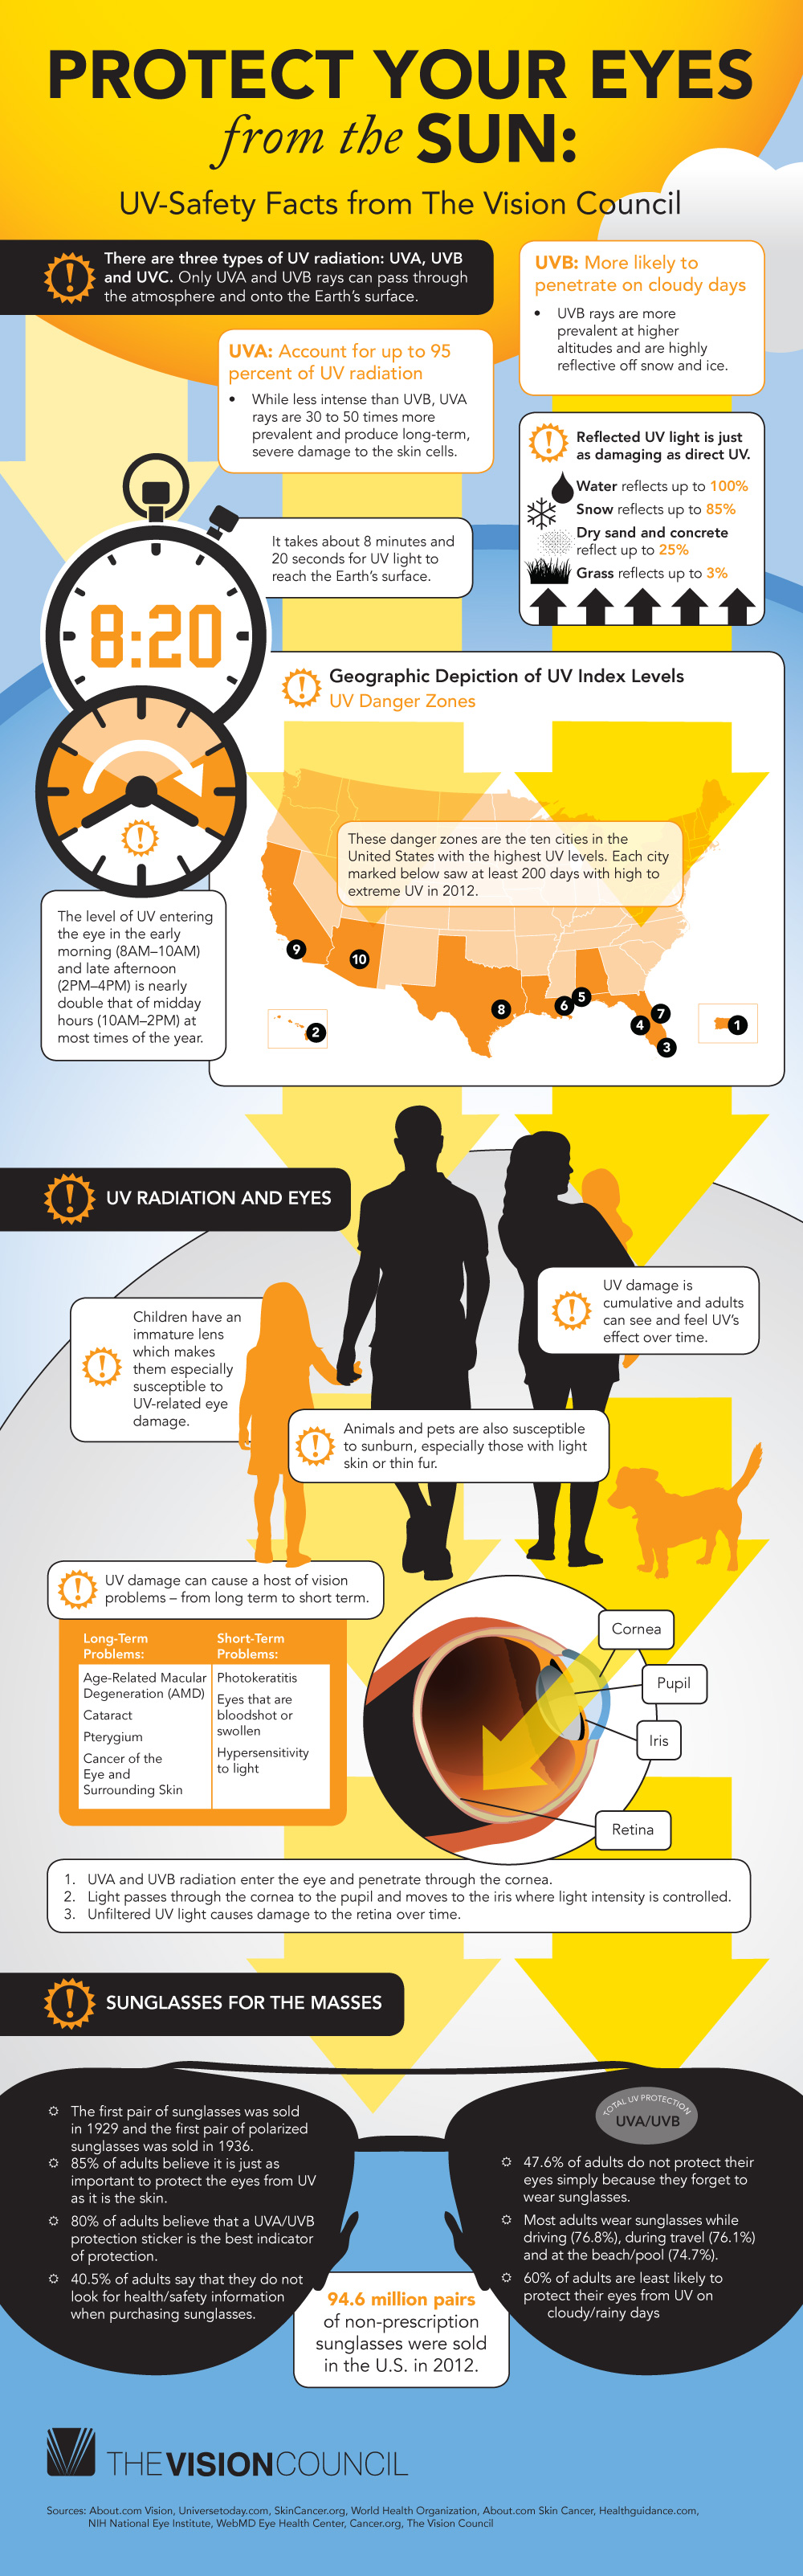 UV safety facts